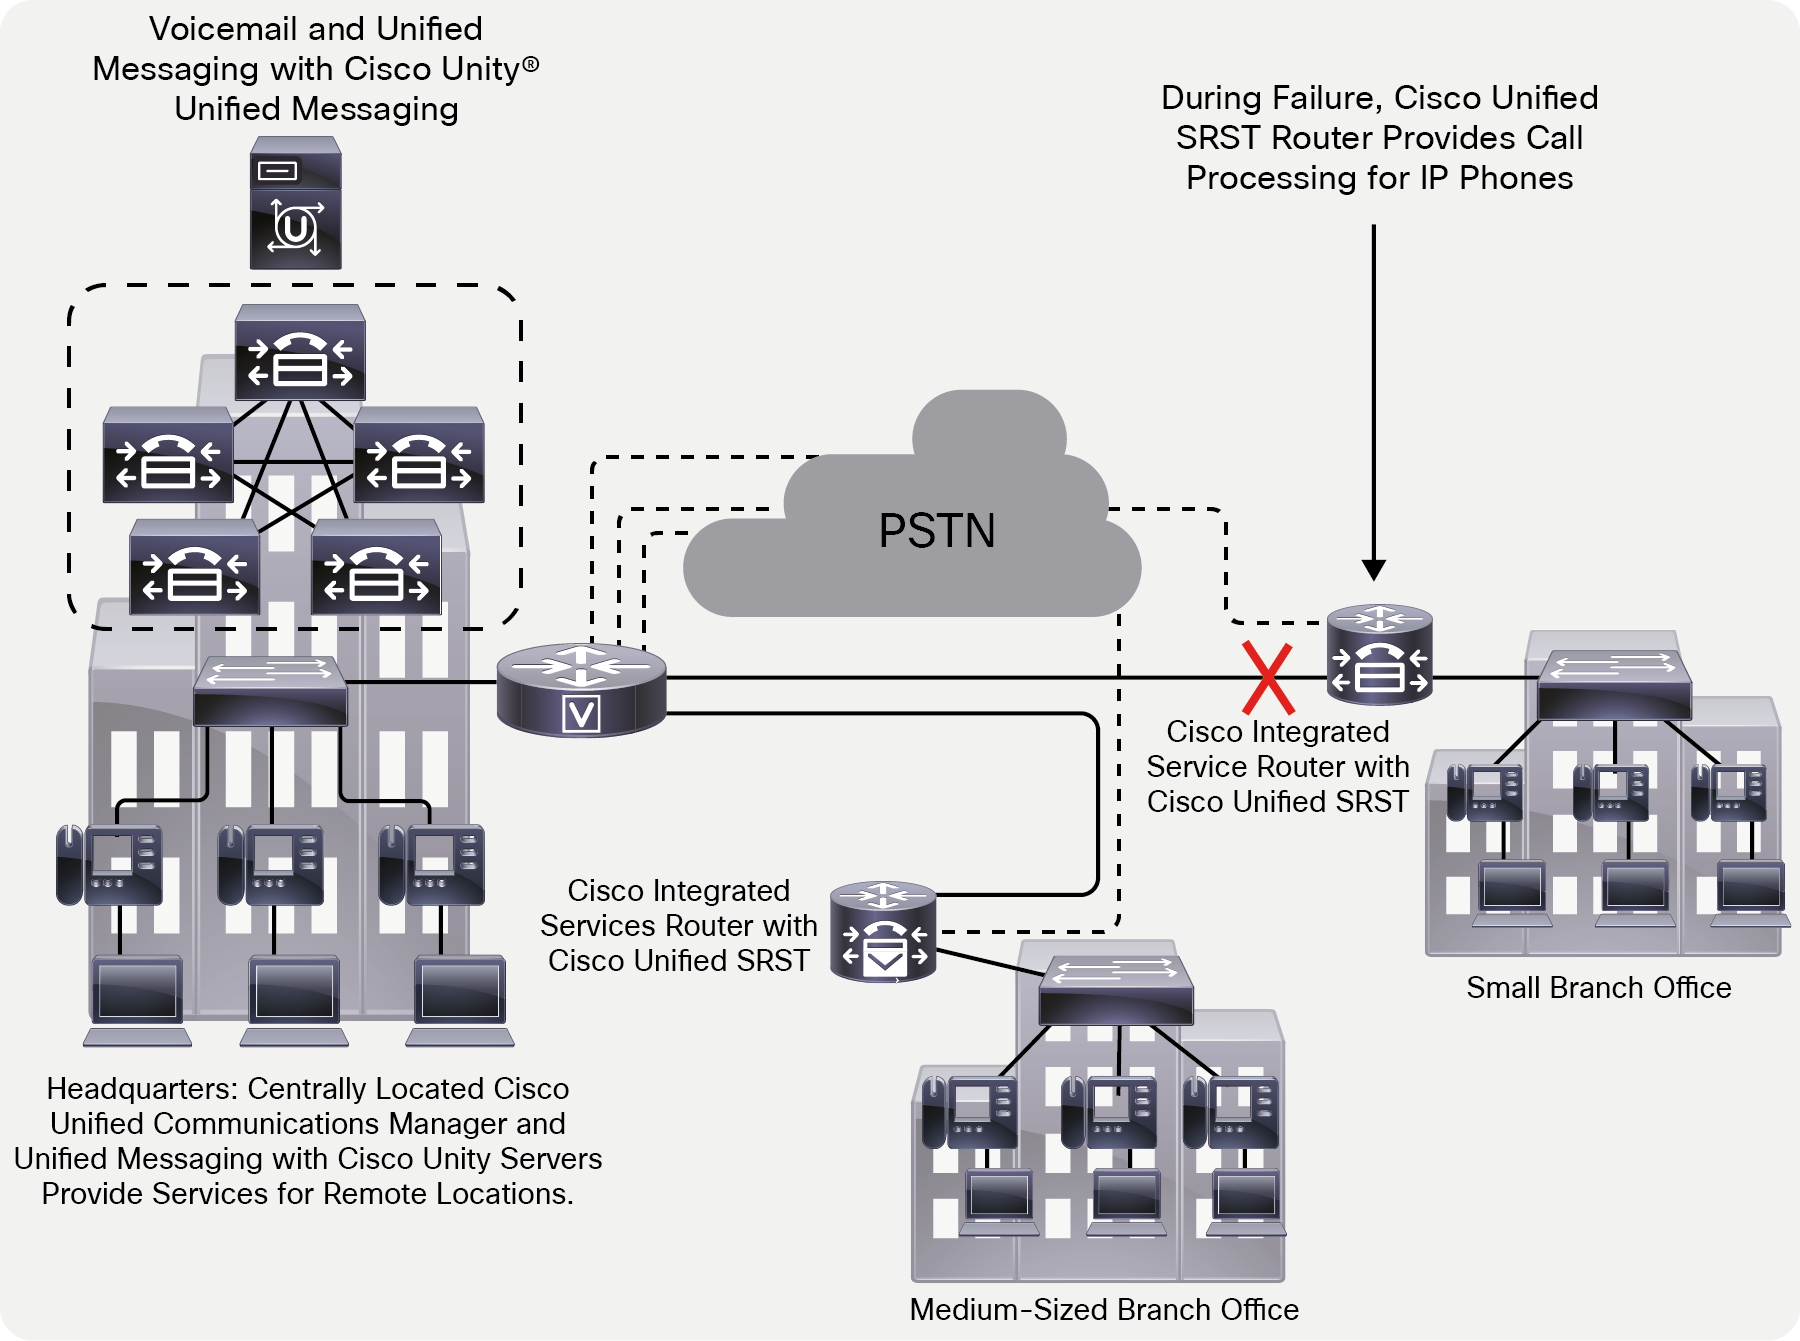 Centralized Cisco Unified Communications Manager deployment with remote site experiencing a WAN failure and Cisco Integrated Services Router with Cisco Unified SRST